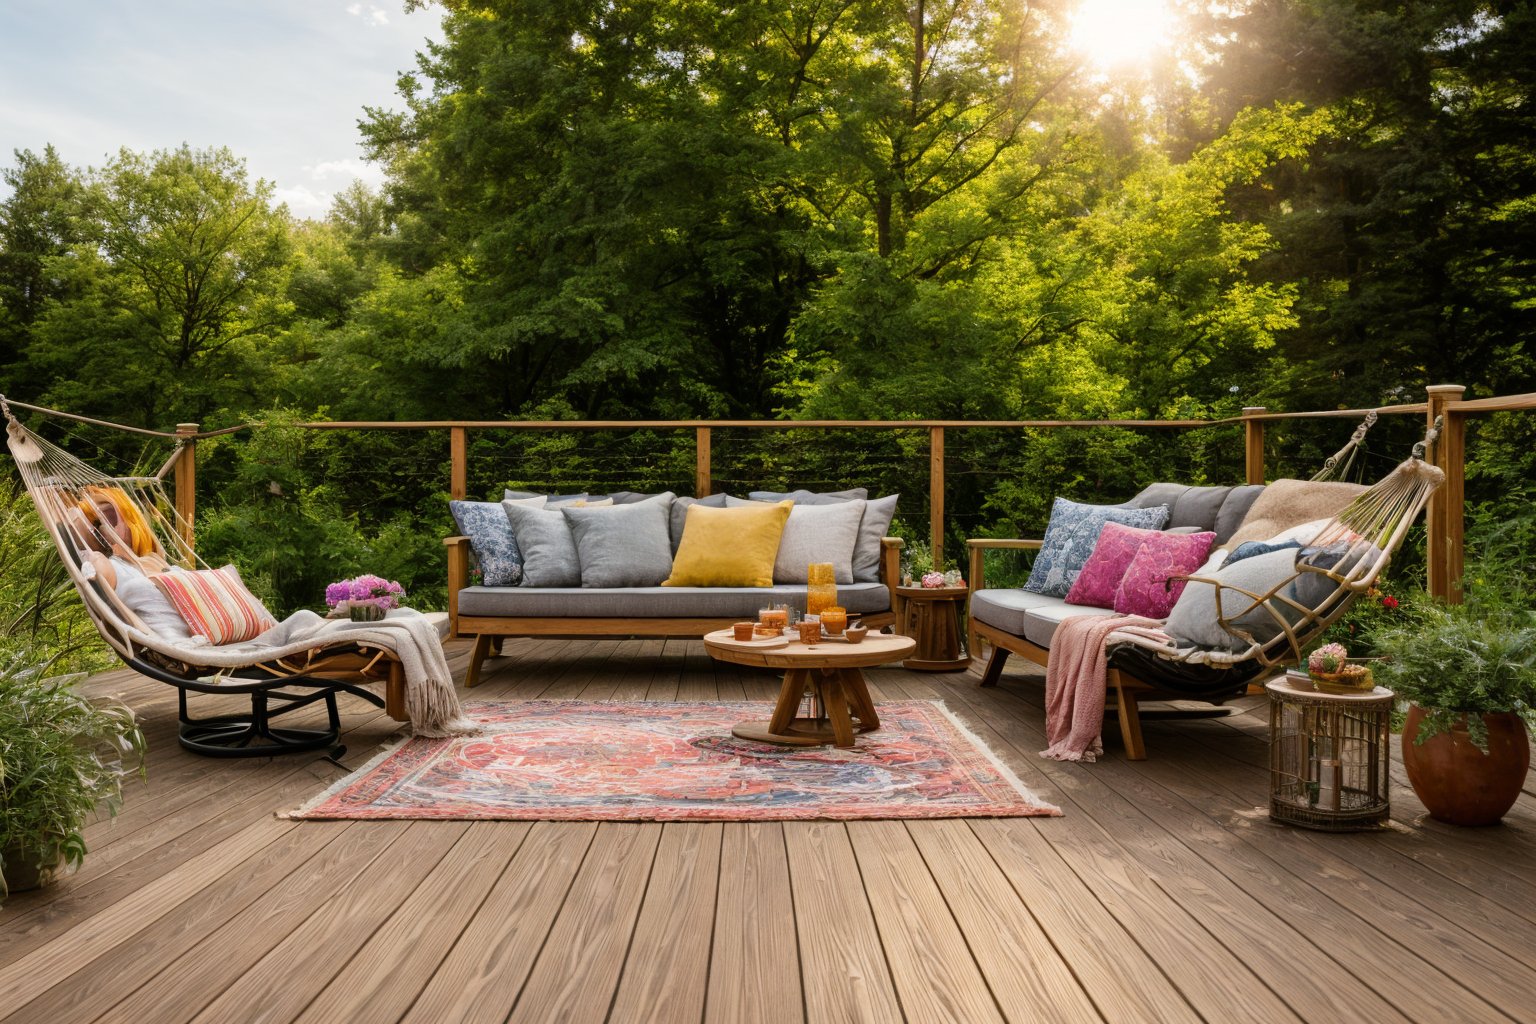 Dive into the world of Photography, capturing the essence of a wooden deck with a hammock chair and a couch in the middle, surrounded by a burst of summer vibrancy. Through the lens of a 35mm camera, inspired by the techniques of Christian Hilfgott Brand, the scene unfolds with an arts and crafts movement touch. The deck is bathed in warm sunlight, casting gentle shadows. The flowers around the deck sway gently, adding a touch of summer breeze. The color temperature is warm, with no facial expressions to capture. The lighting is soft and natural, creating a serene and inviting atmosphere.  <lora:lora_garden_architecture_Exterior_SDlife_Chiasedamme_V1.0:0.6>